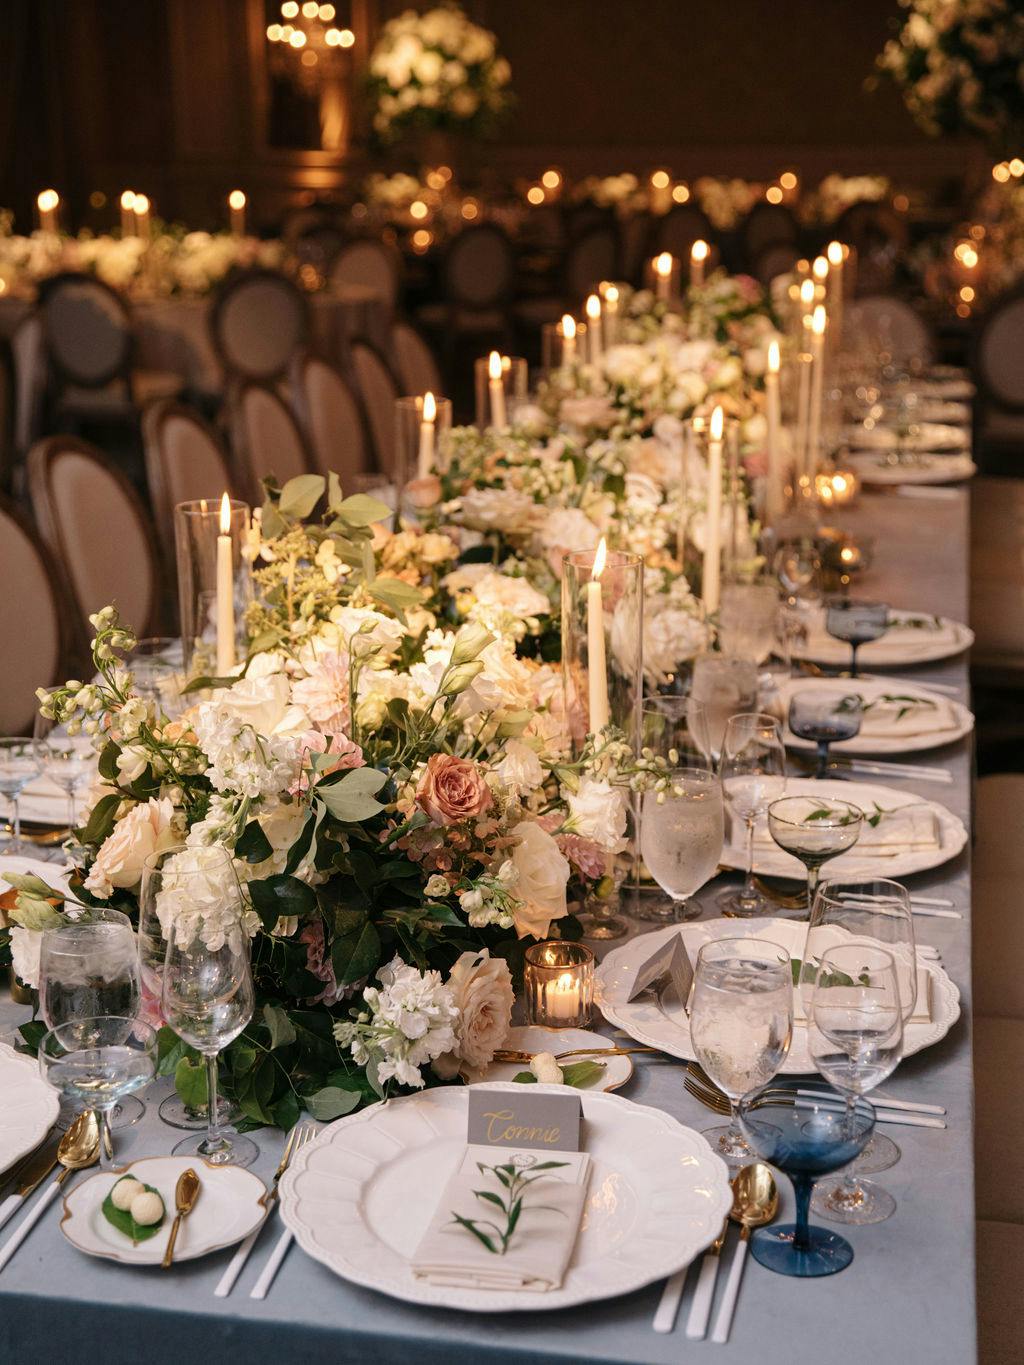 Elegant Floral Wedding Tablescape at Four Seasons Hotel Chicago Planned by Bliss Events Chicago | PartySlate